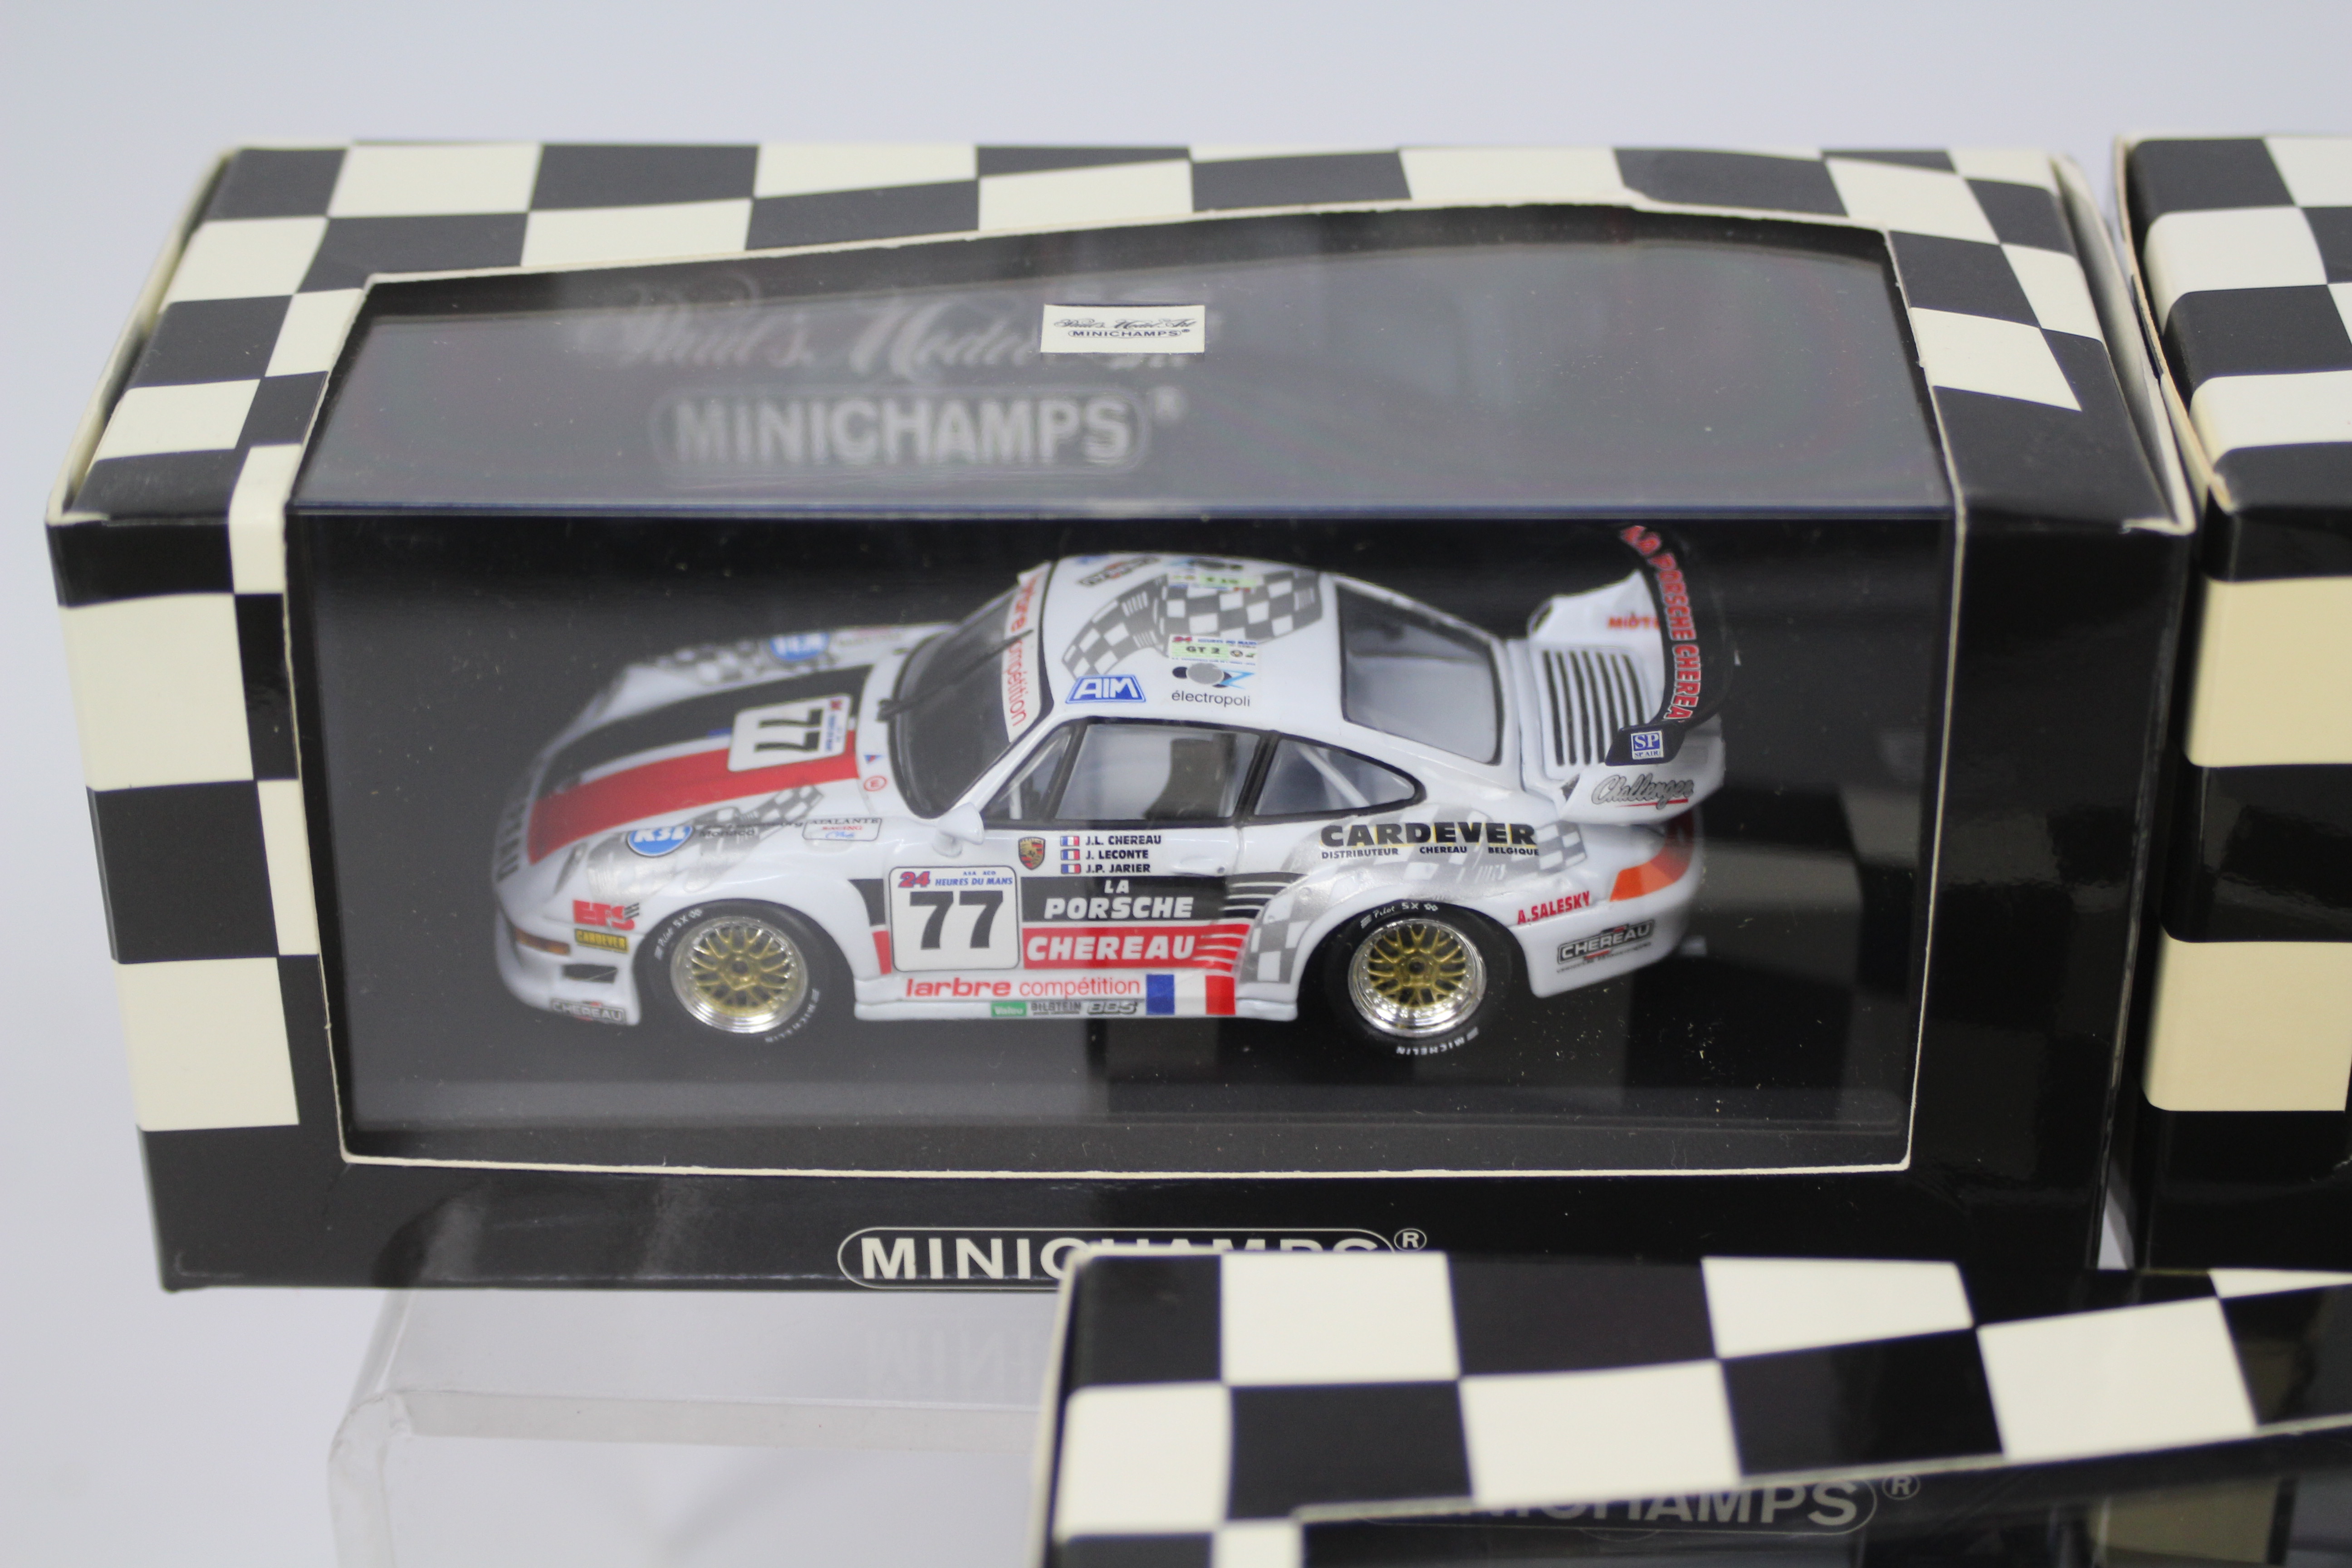 Minichamps - 3 x limited edition Porsche 911 models in 1:43 scale, a GT2 Evo, - Image 3 of 4